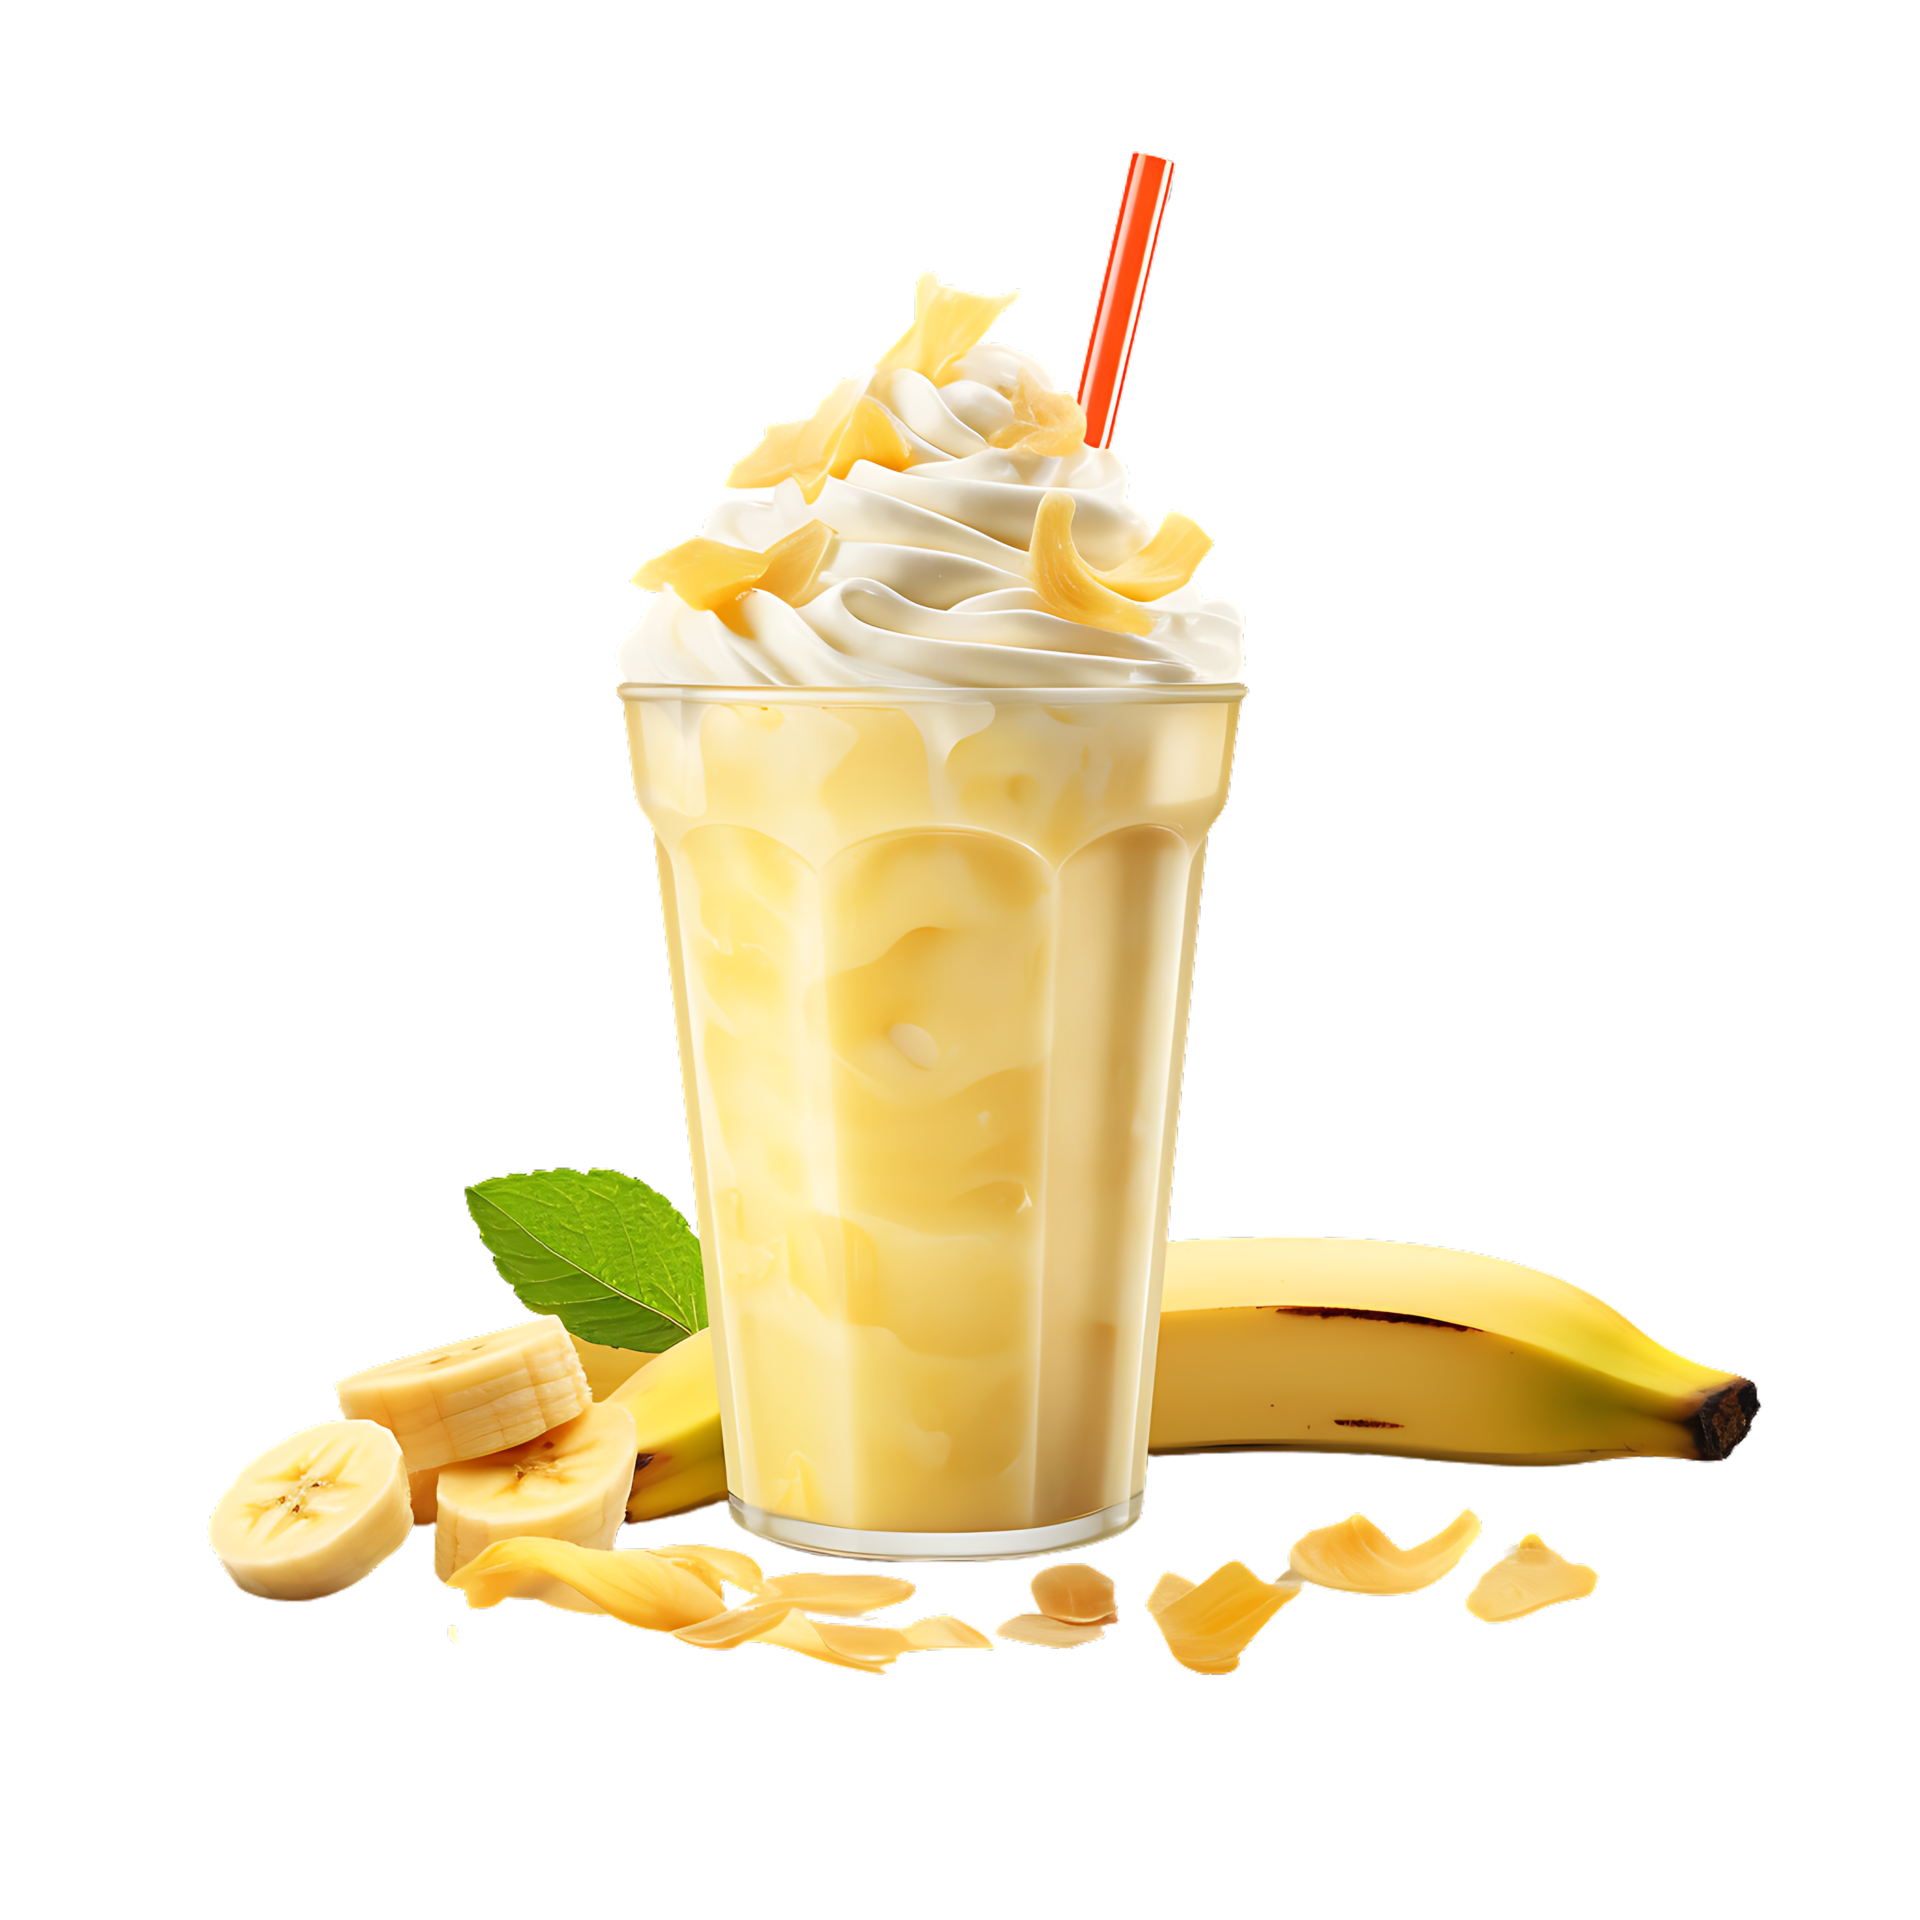 Banana Smoothie Cup with Straw Mockup - Free Download Images High Quality  PNG, JPG